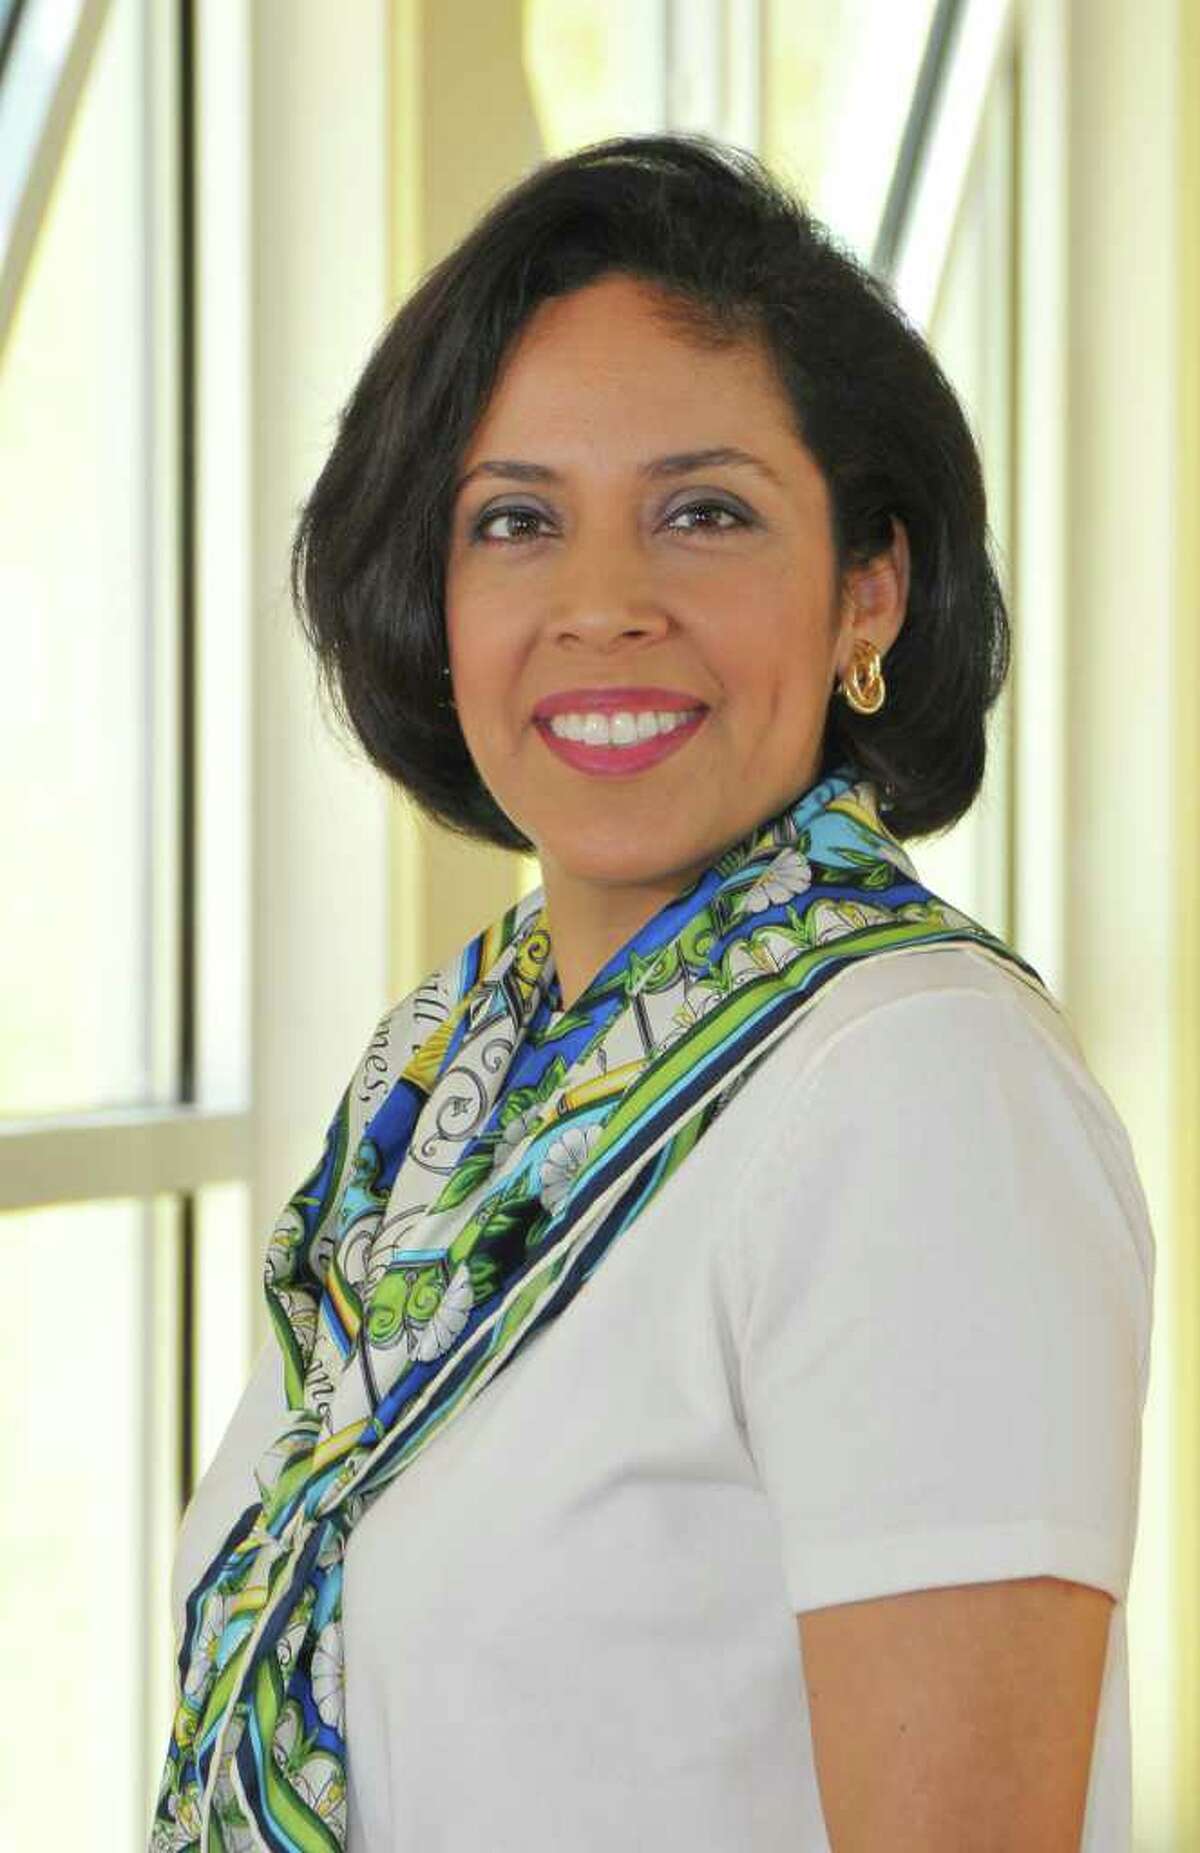 Anna Maria Chávez will lead the Girl Scouts of the United States of America.